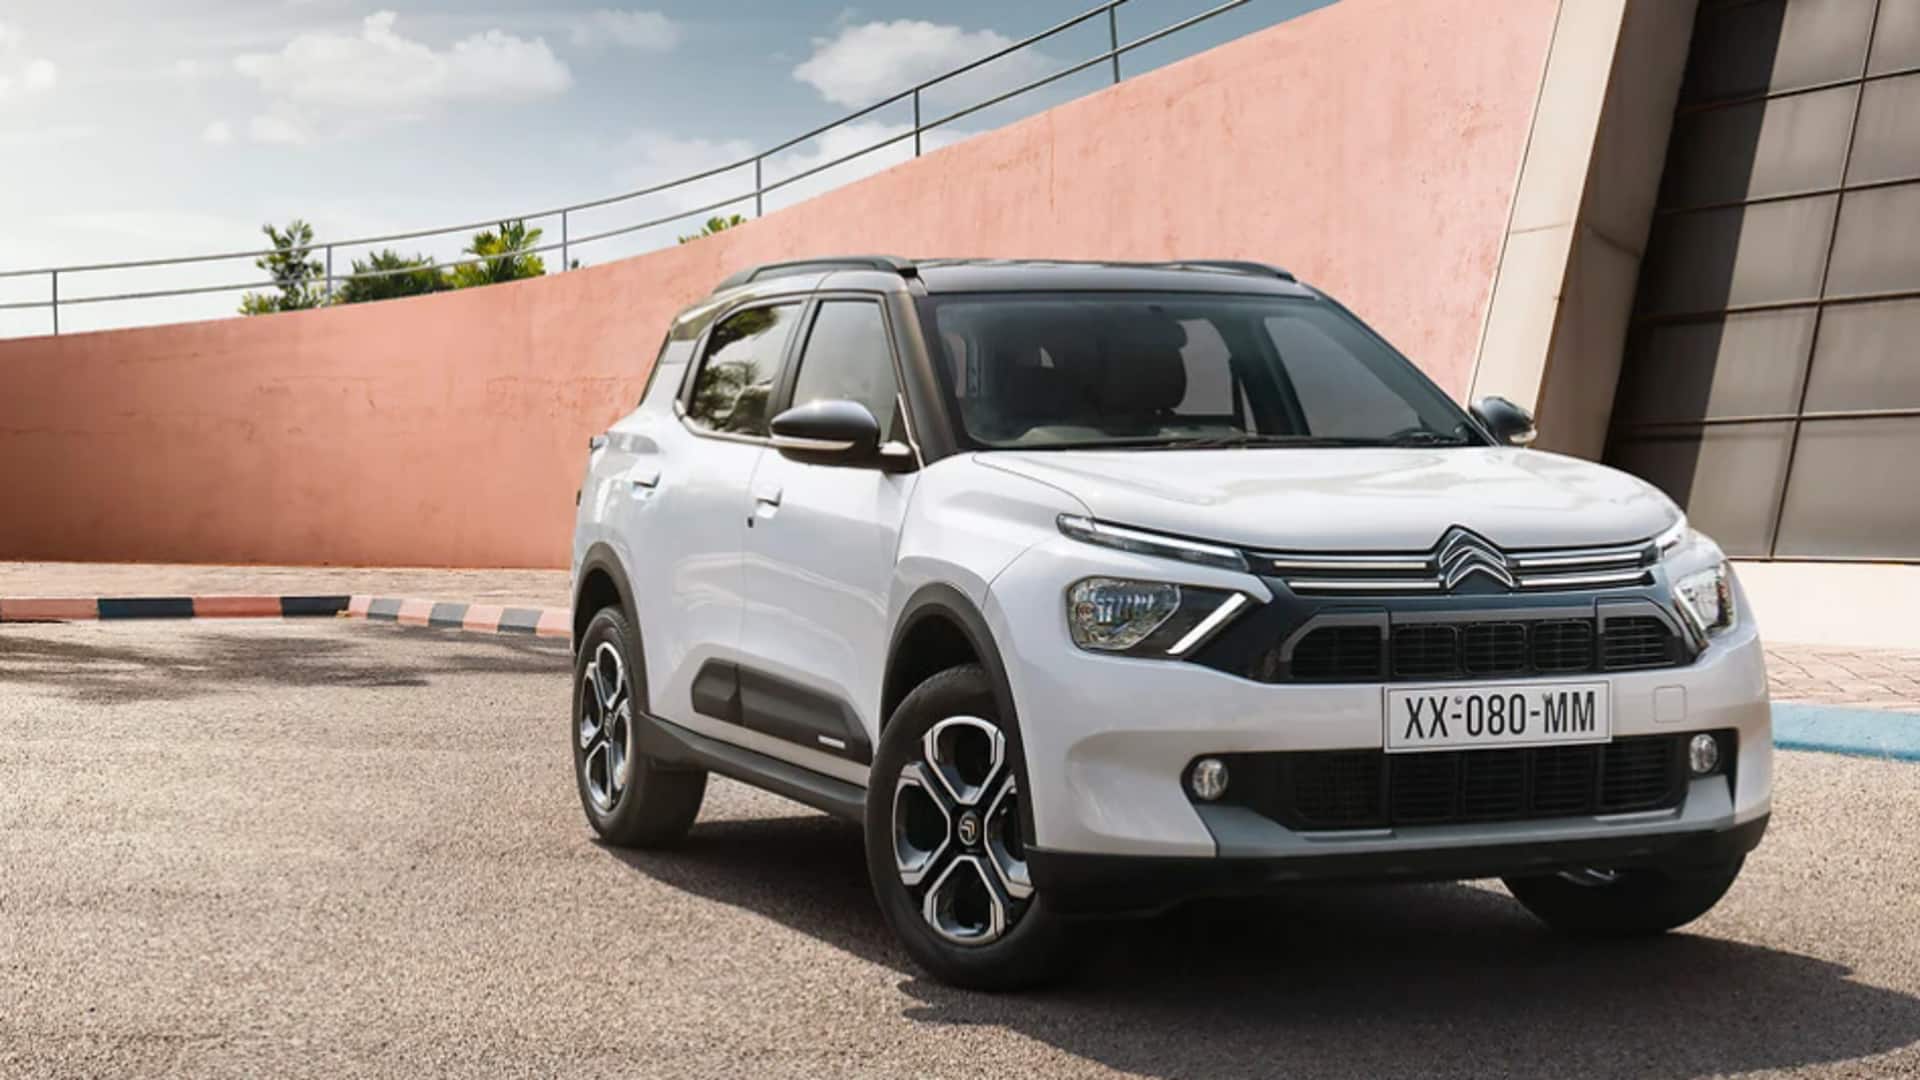 Citroen C3 Aircross to be offered in single 'Max' trim   